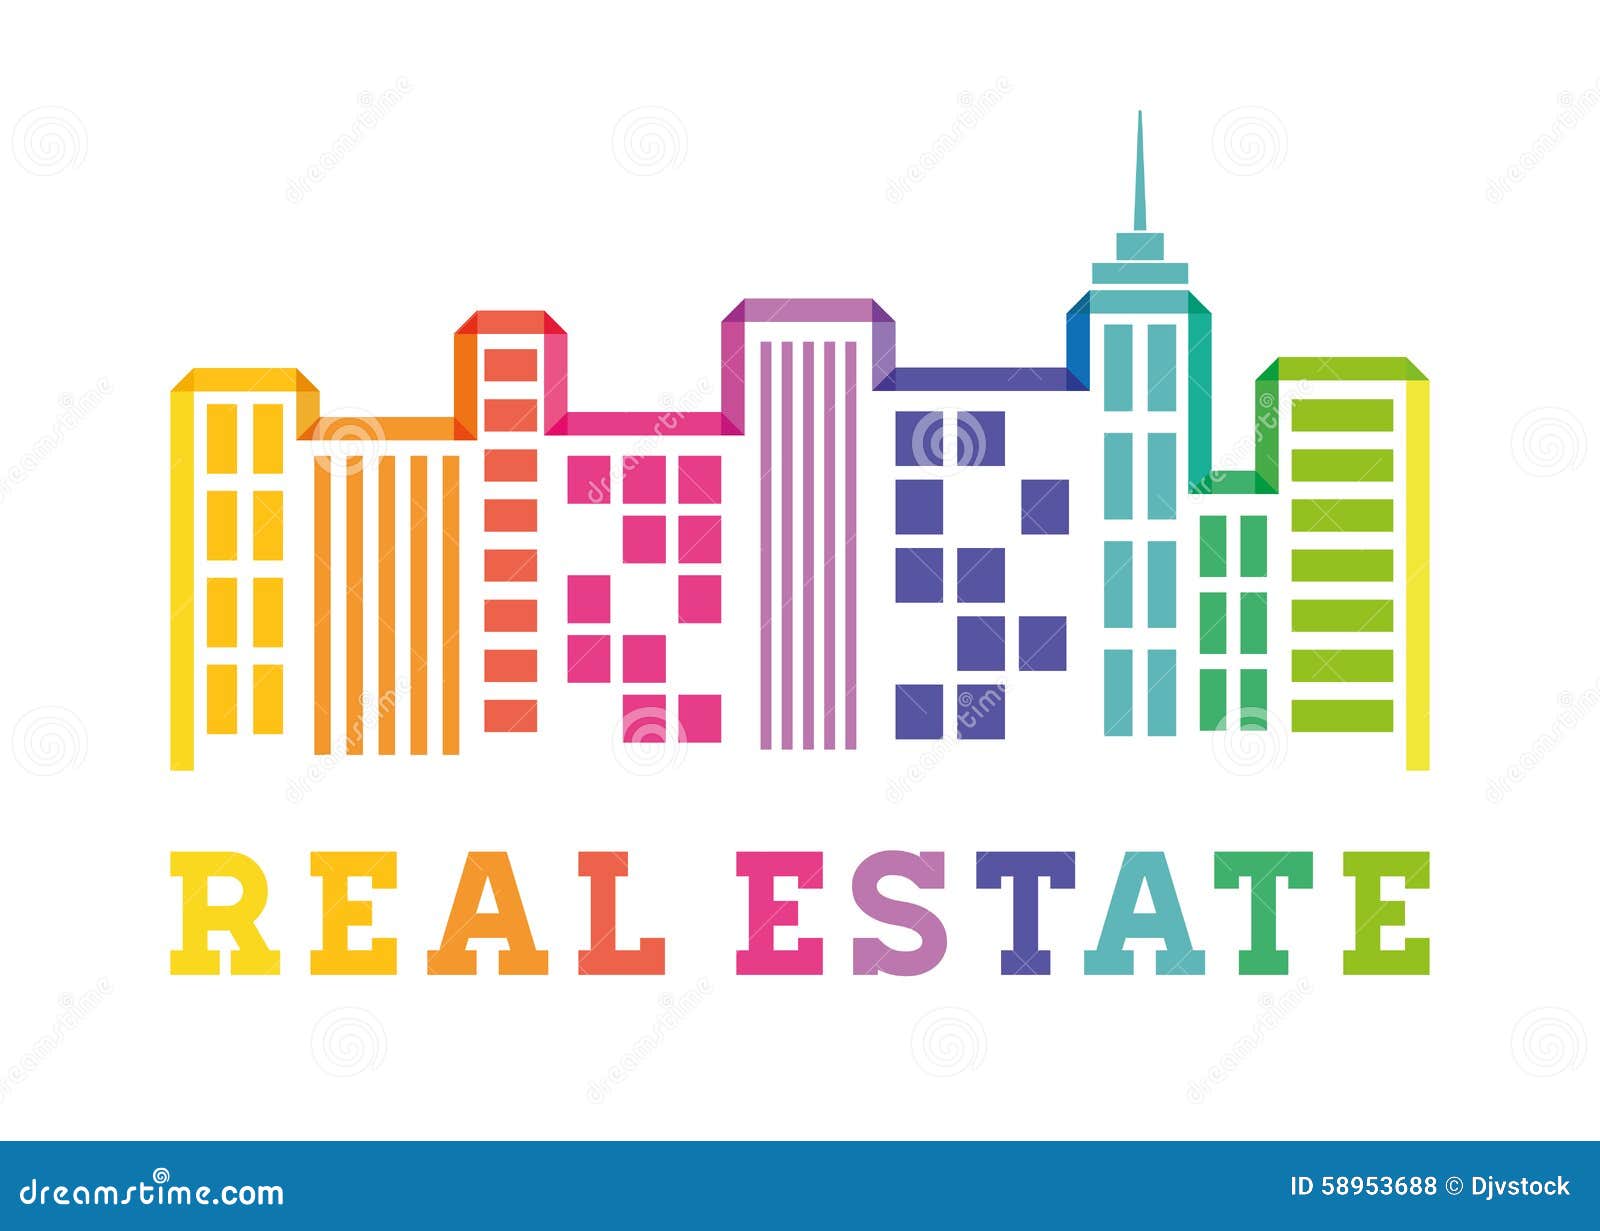 real estate edifices and residential towers